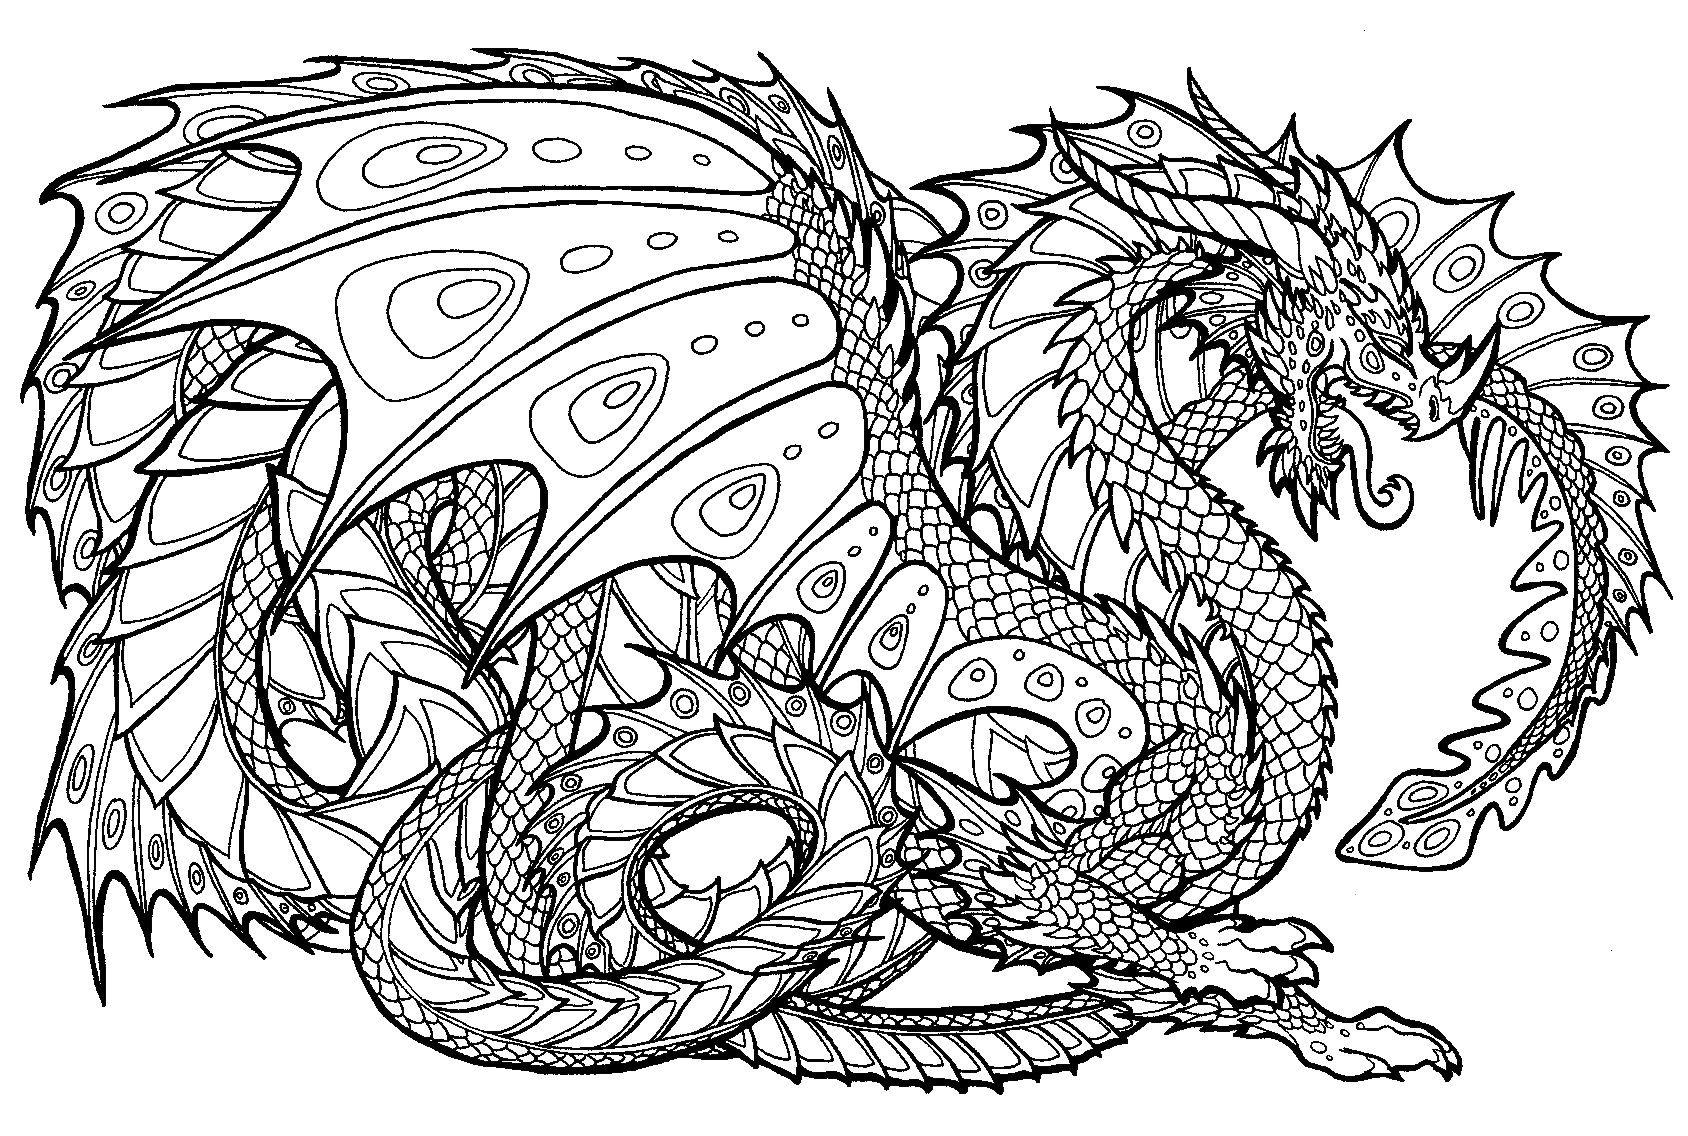 Dragon Coloring Pages for Adults.